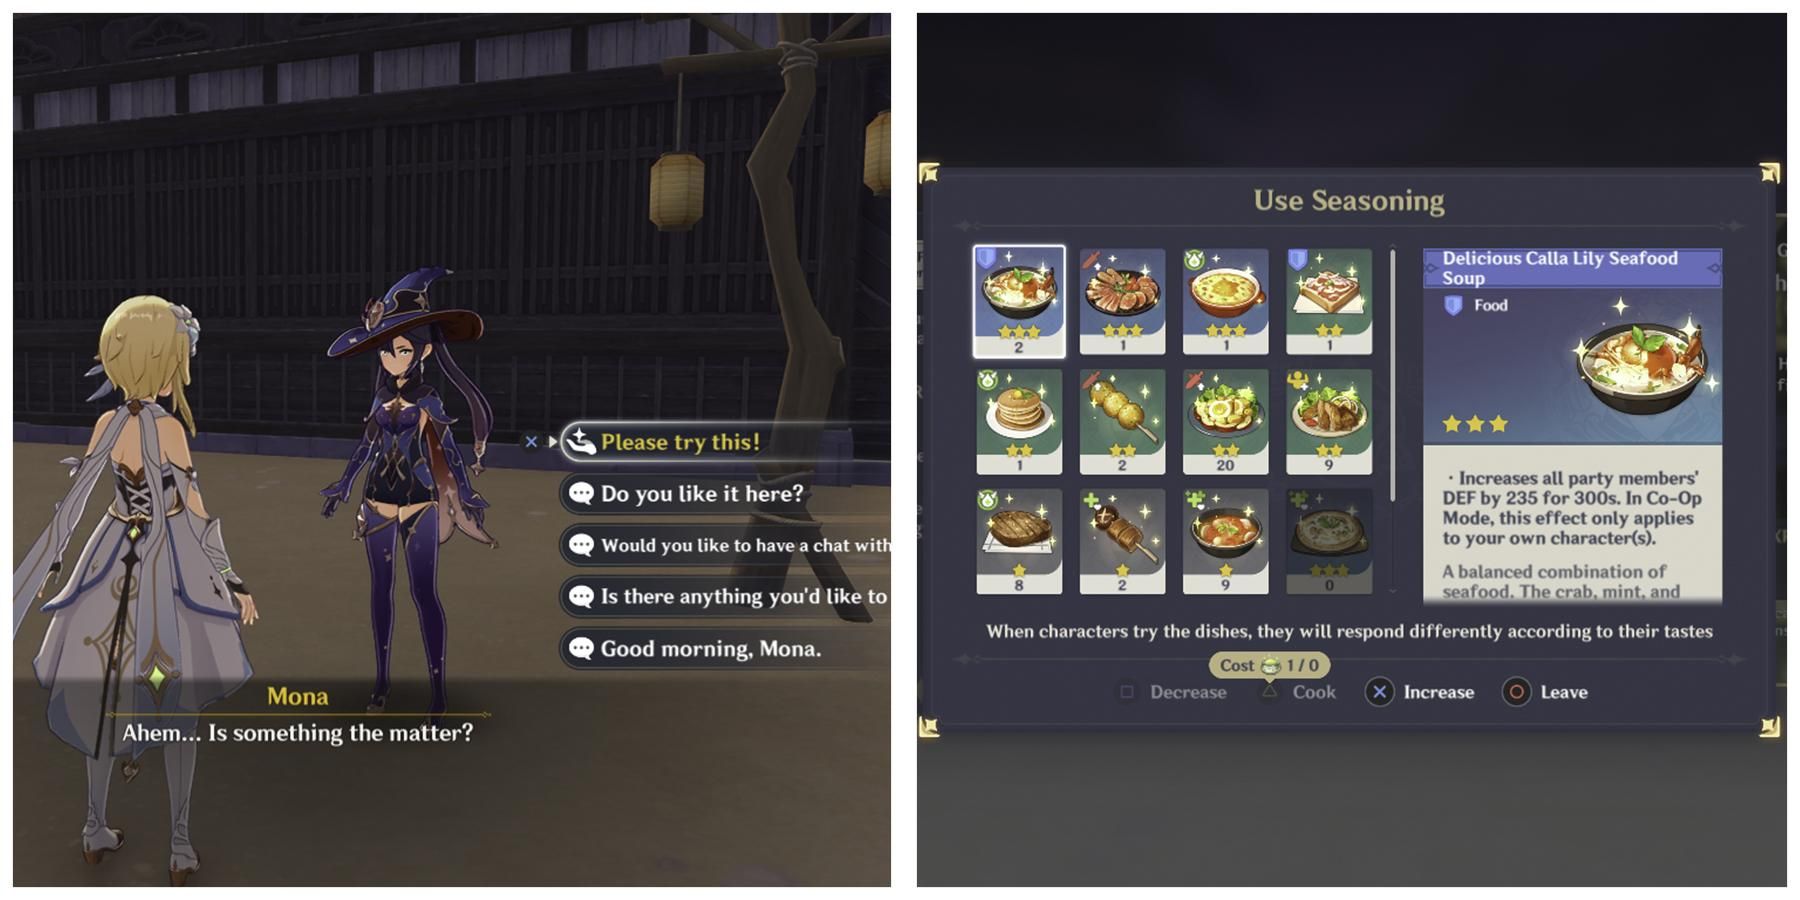 Genshin Impact 3.6: Character Favorite Dishes In Spices From The West Event